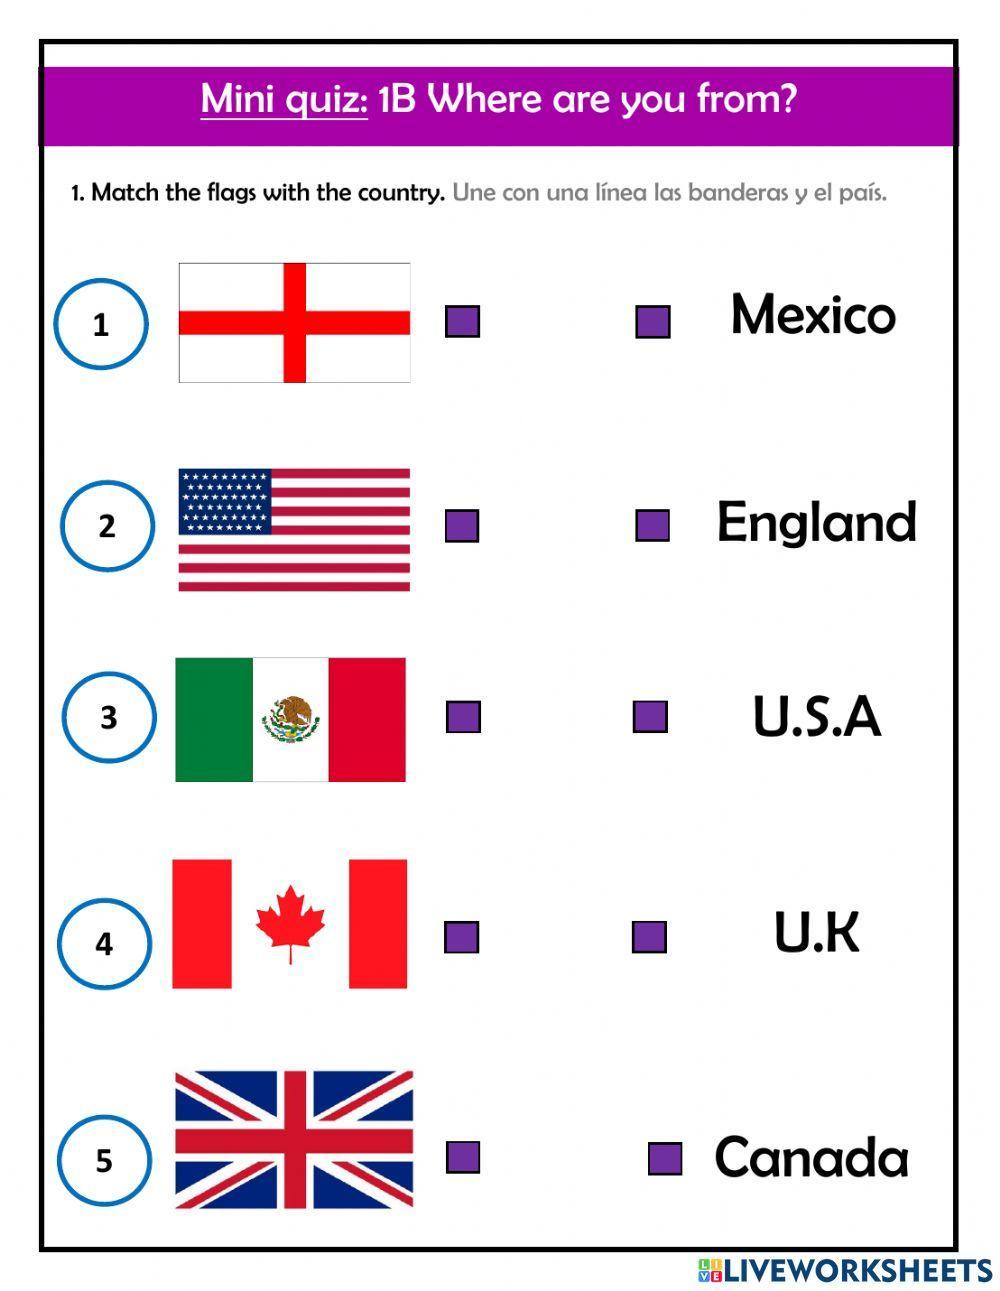 Flags and countries